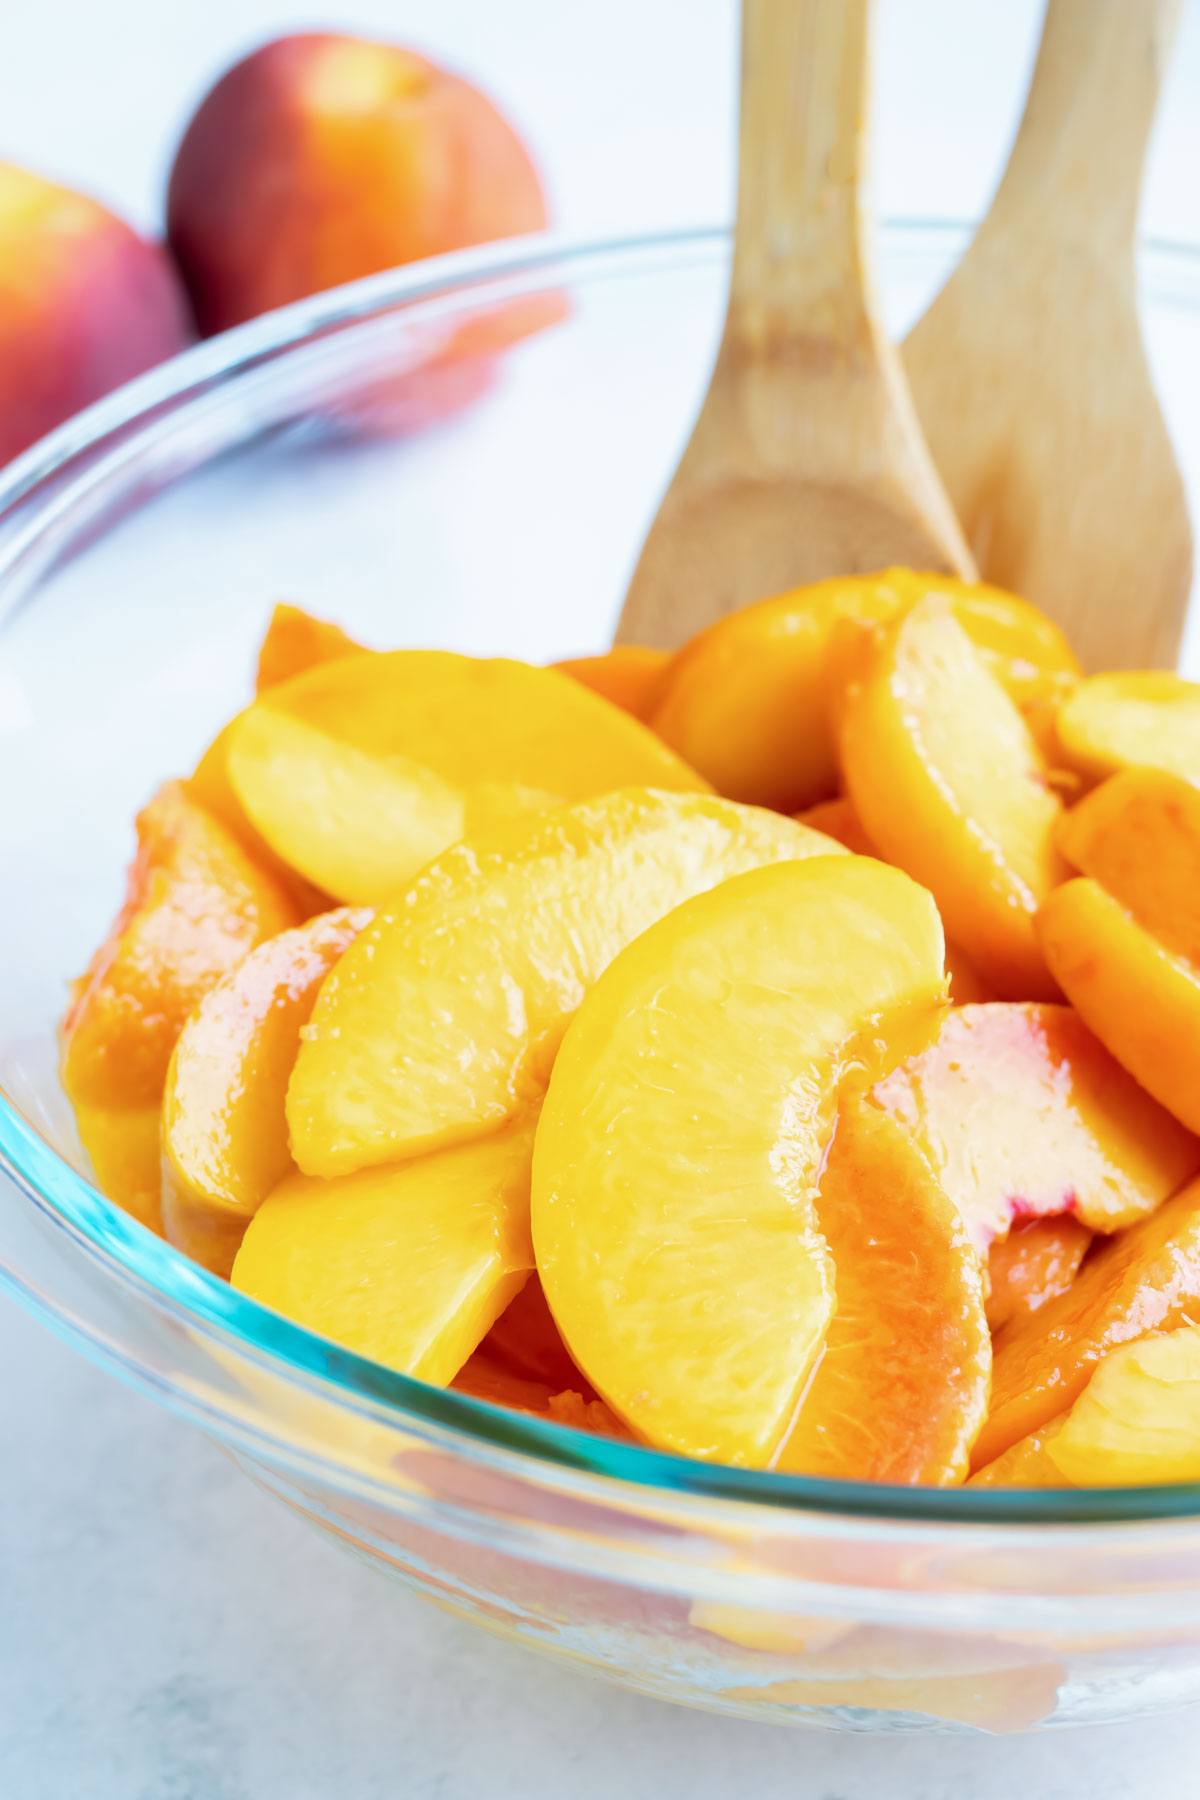 Sliced and peeled peaches are in a glass bowl on the counter with wooden spoons.